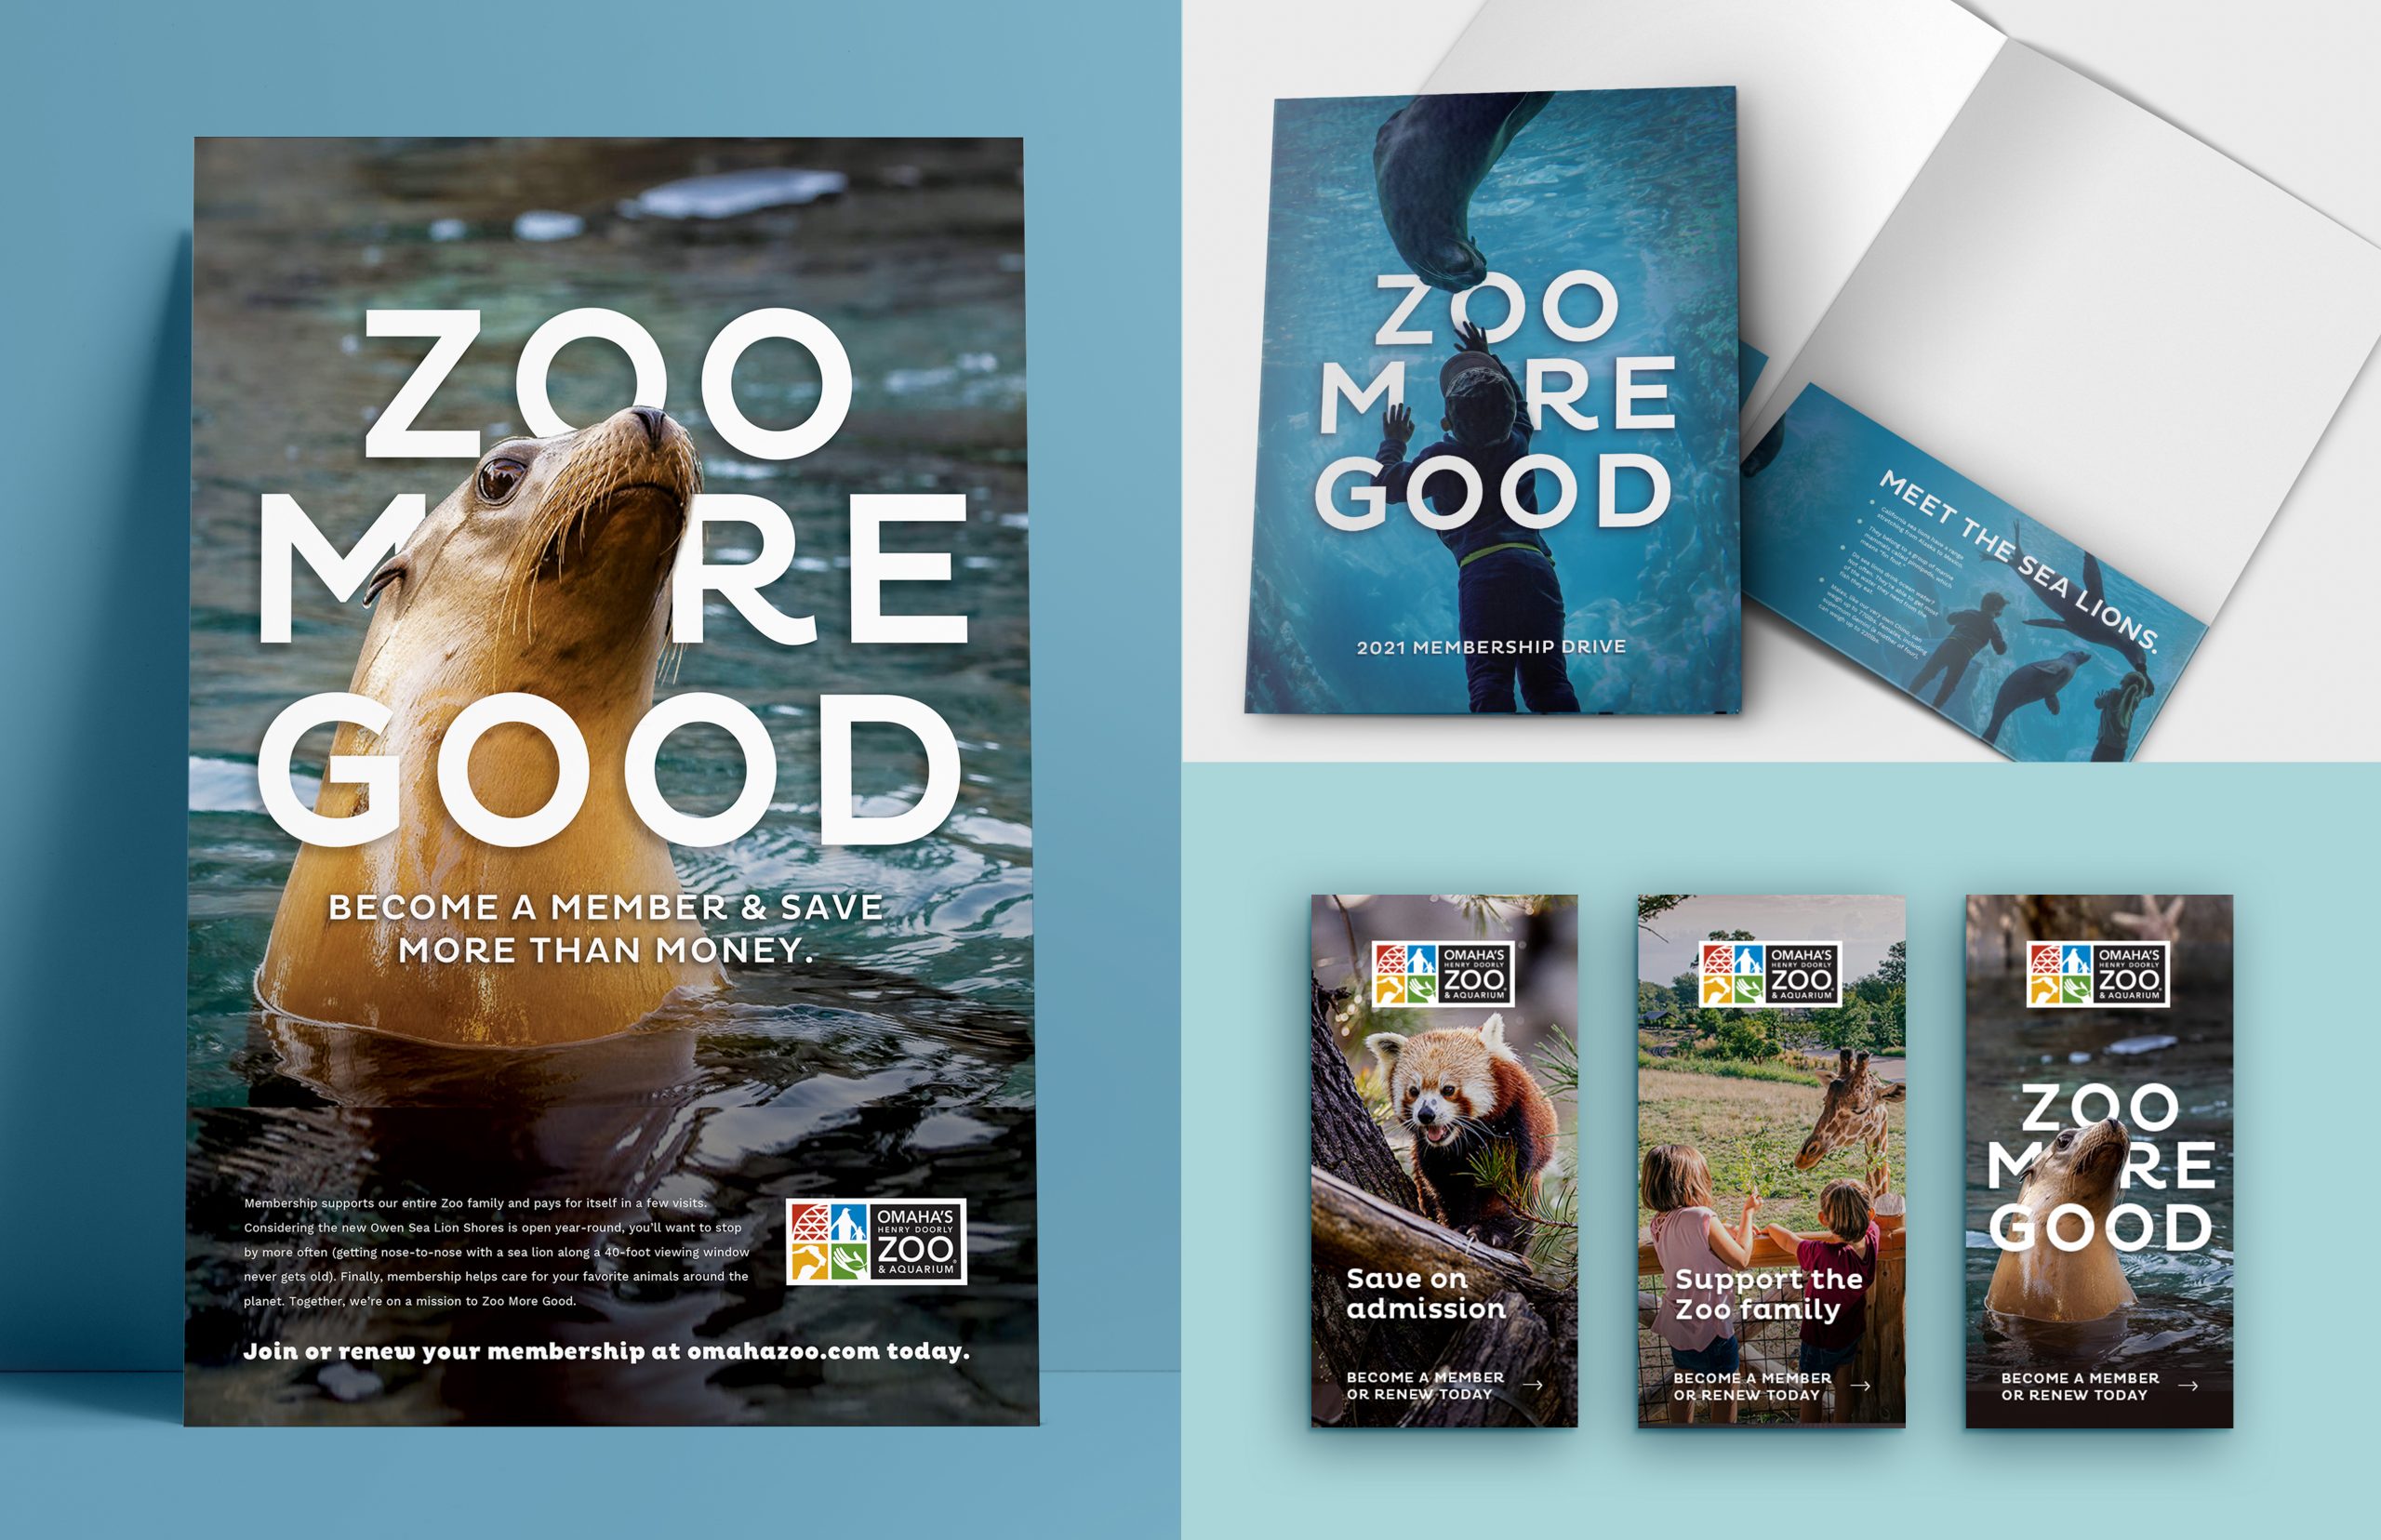 Zoo More Good campaign